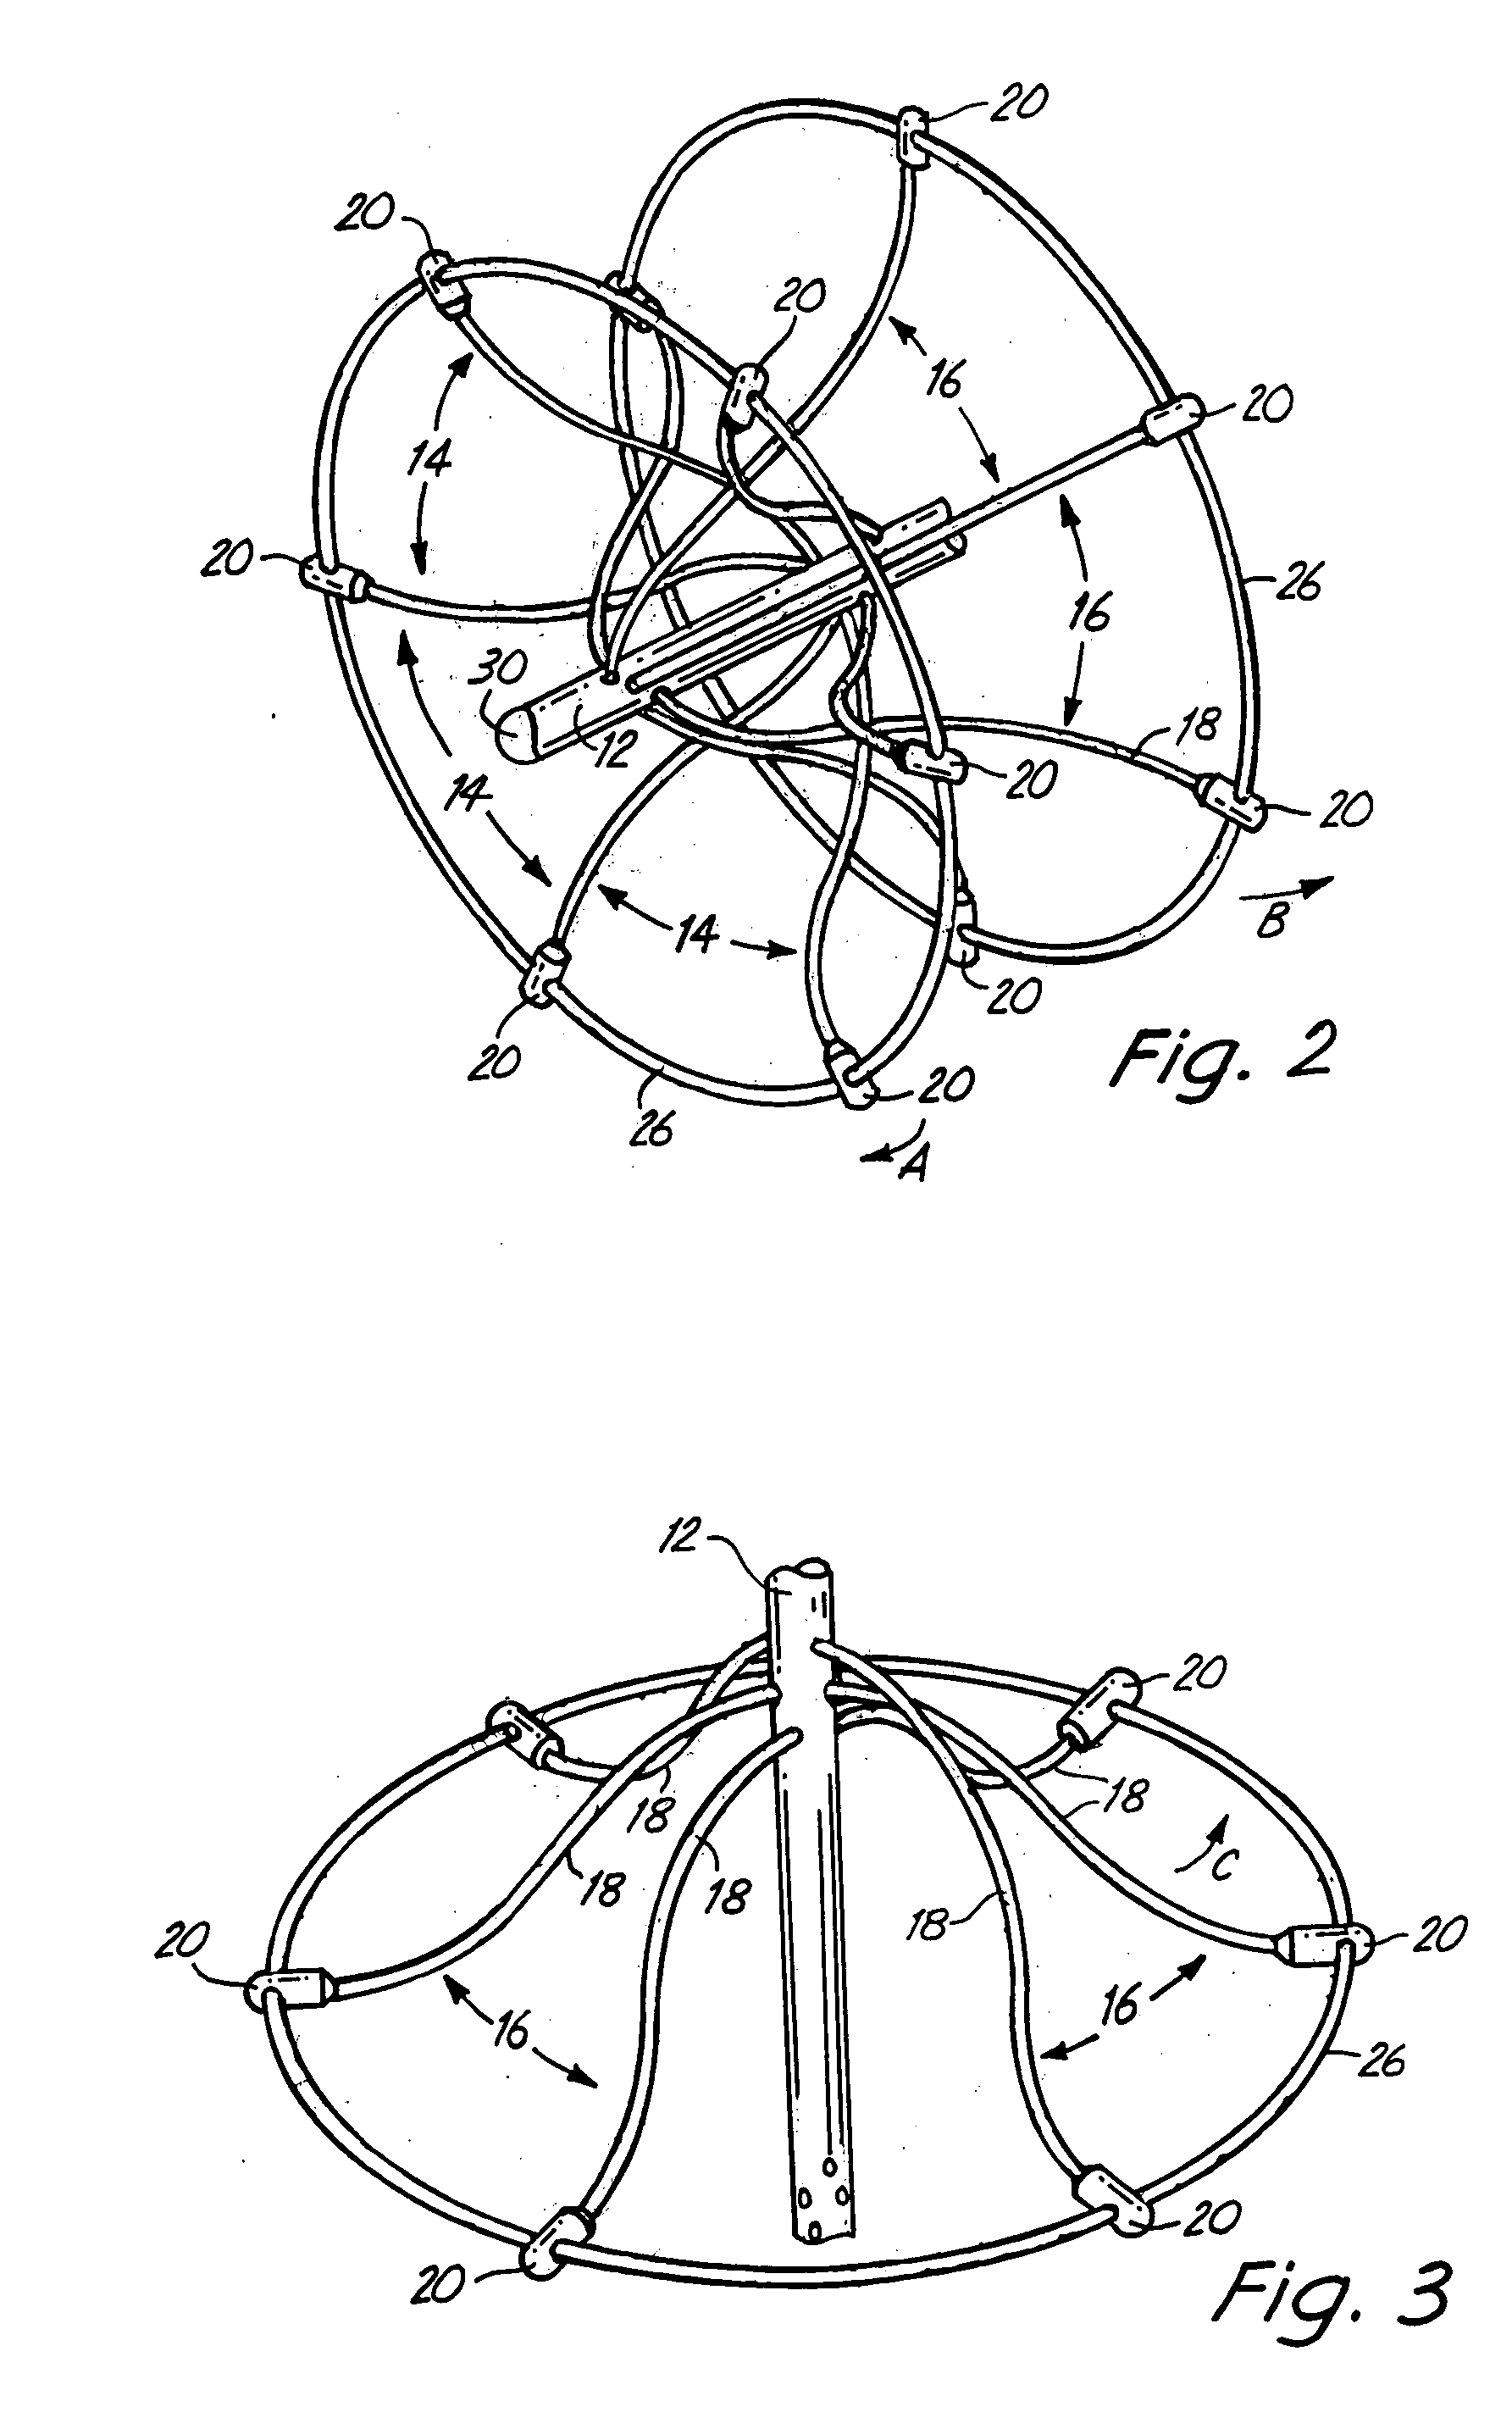 ASD closure device with self centering arm network